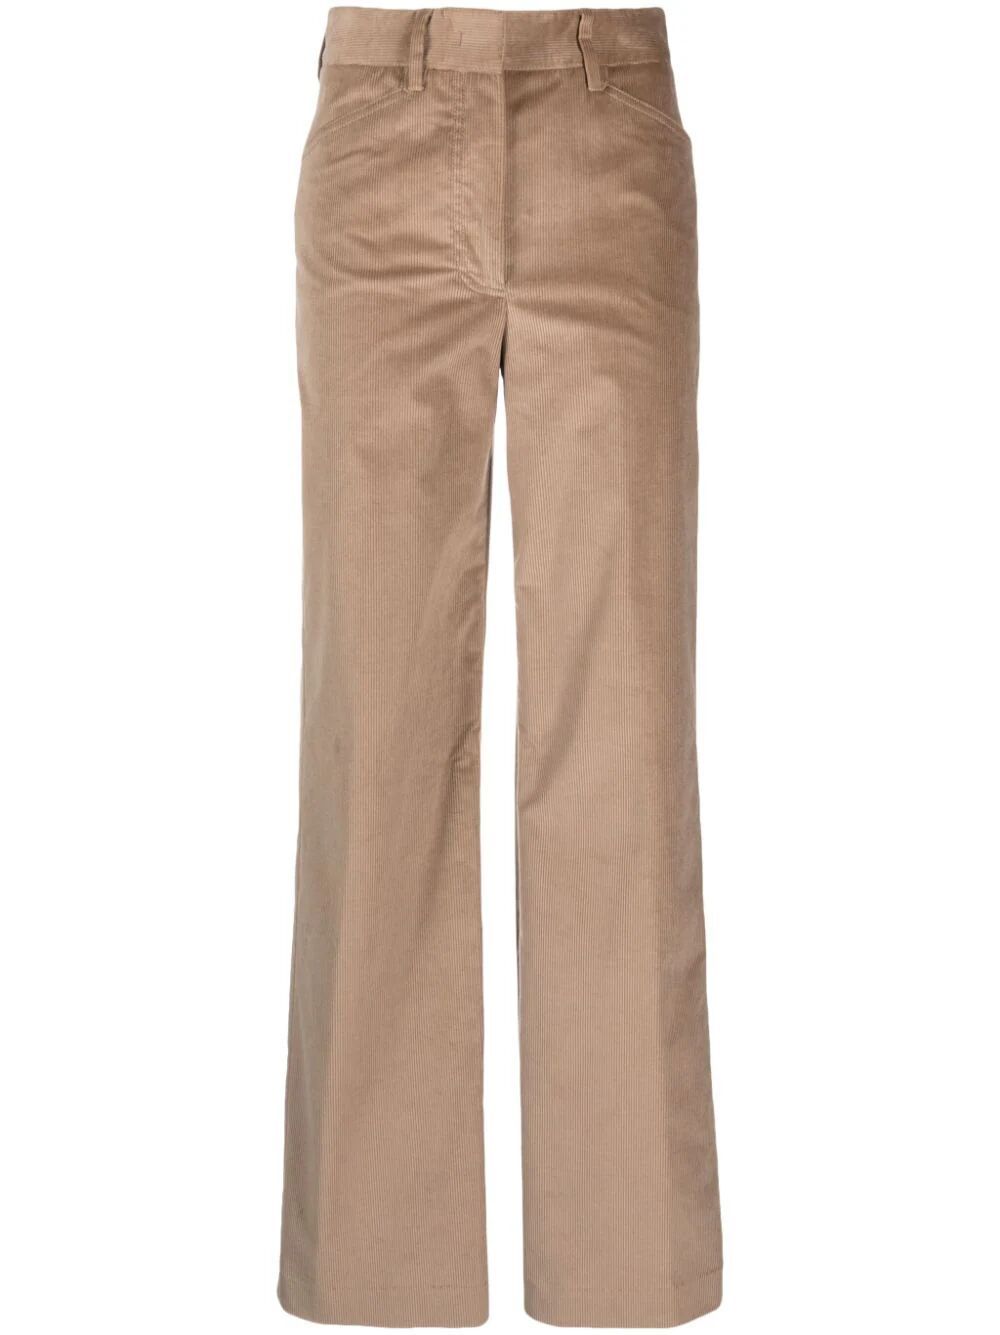 PAUL SMITH WOMENS TROUSERS